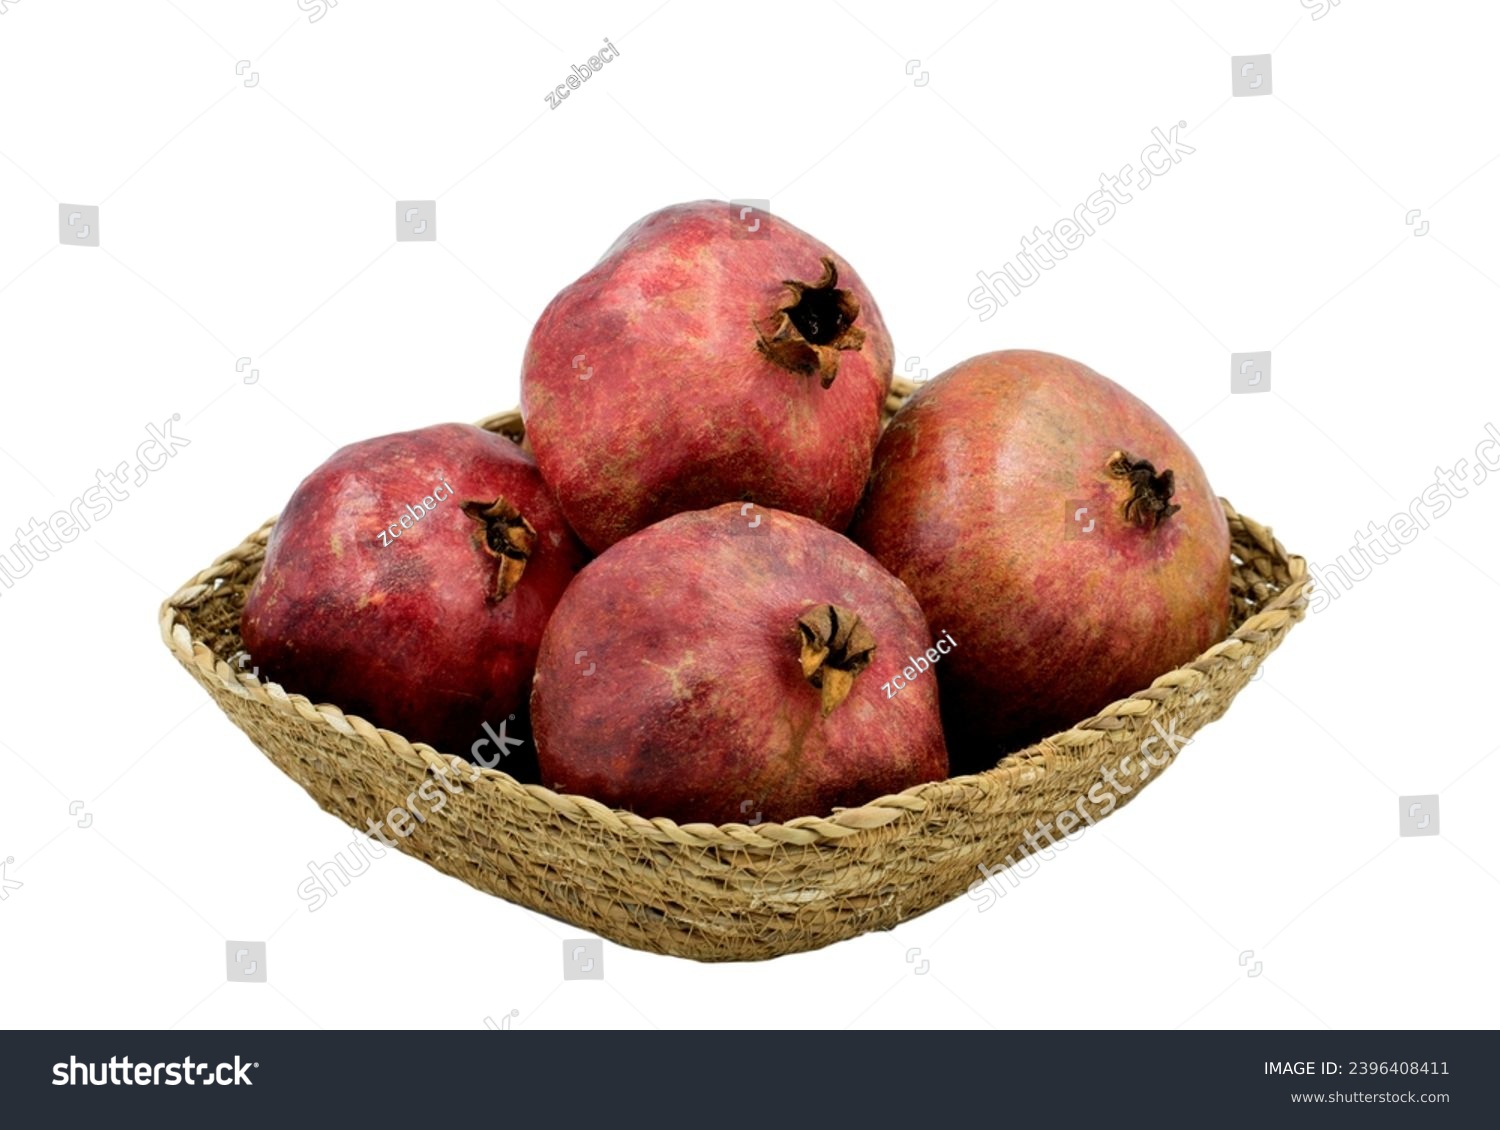 Four pomes of the pomegranate (Punica granatum) in a basket plate #2396408411